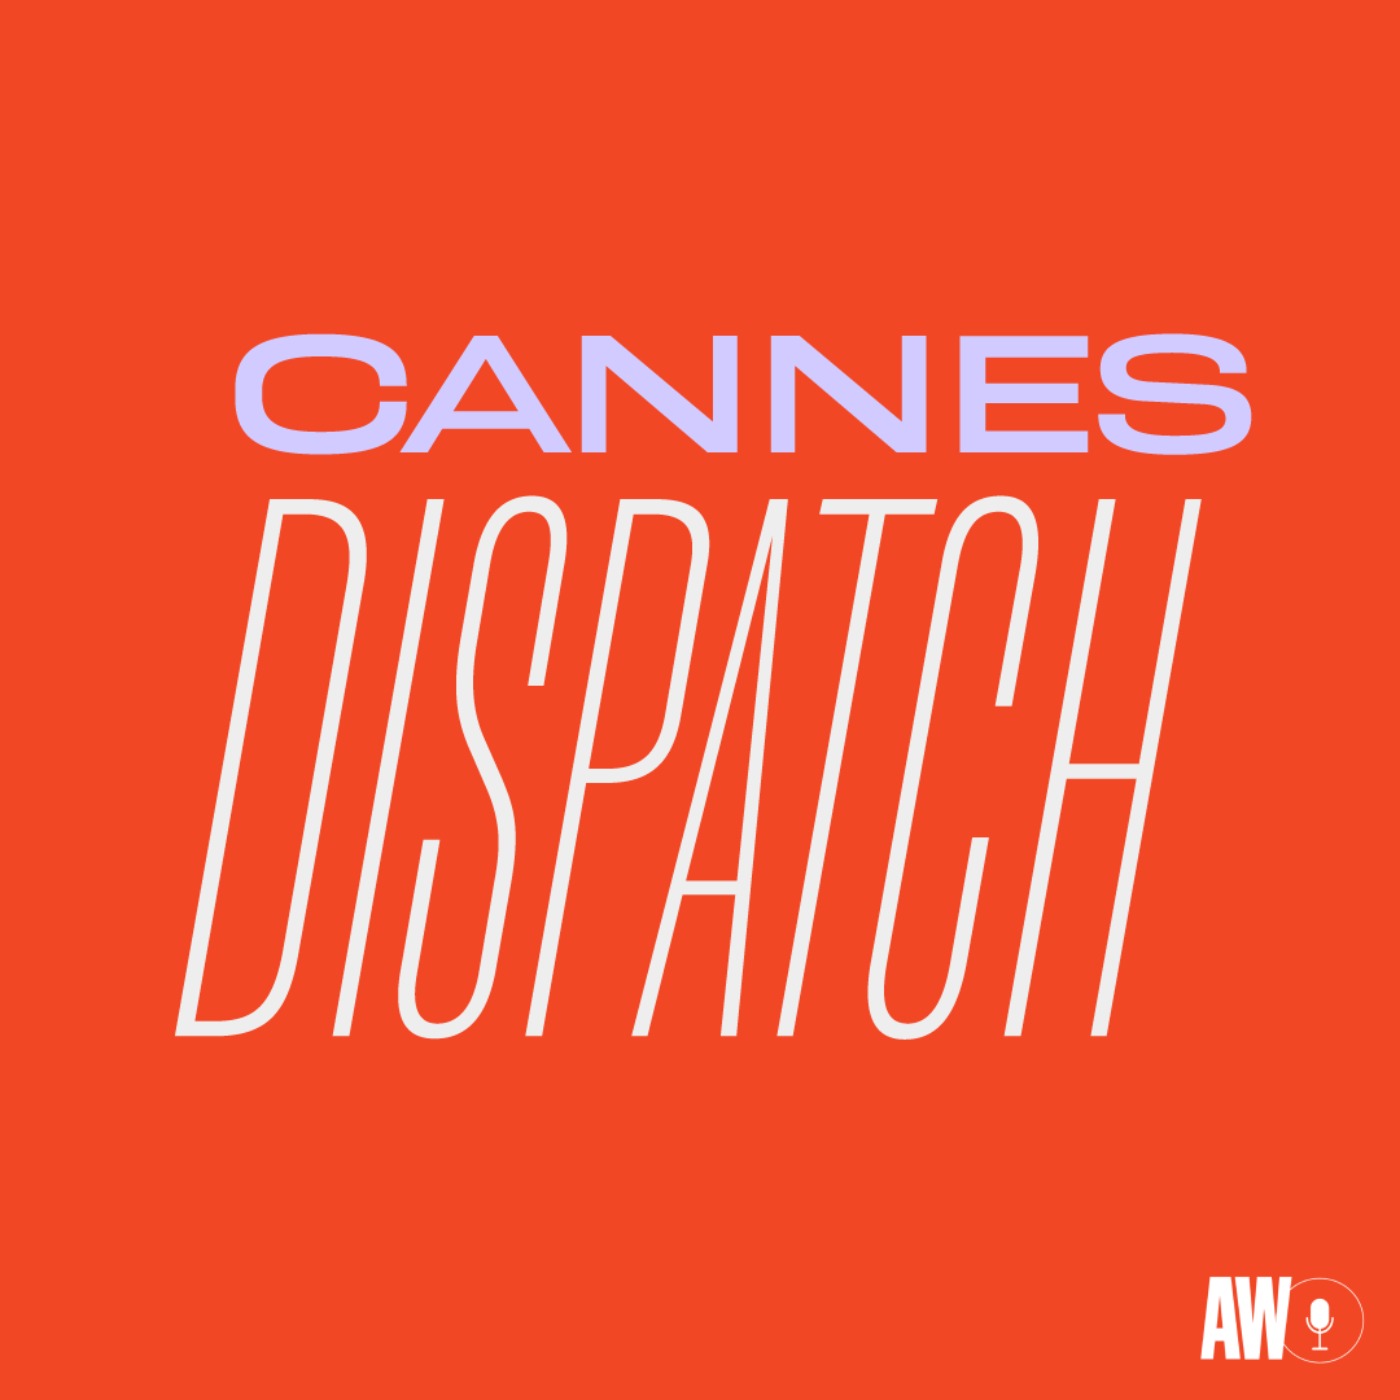 Retour sur Cannes with ADWEEK